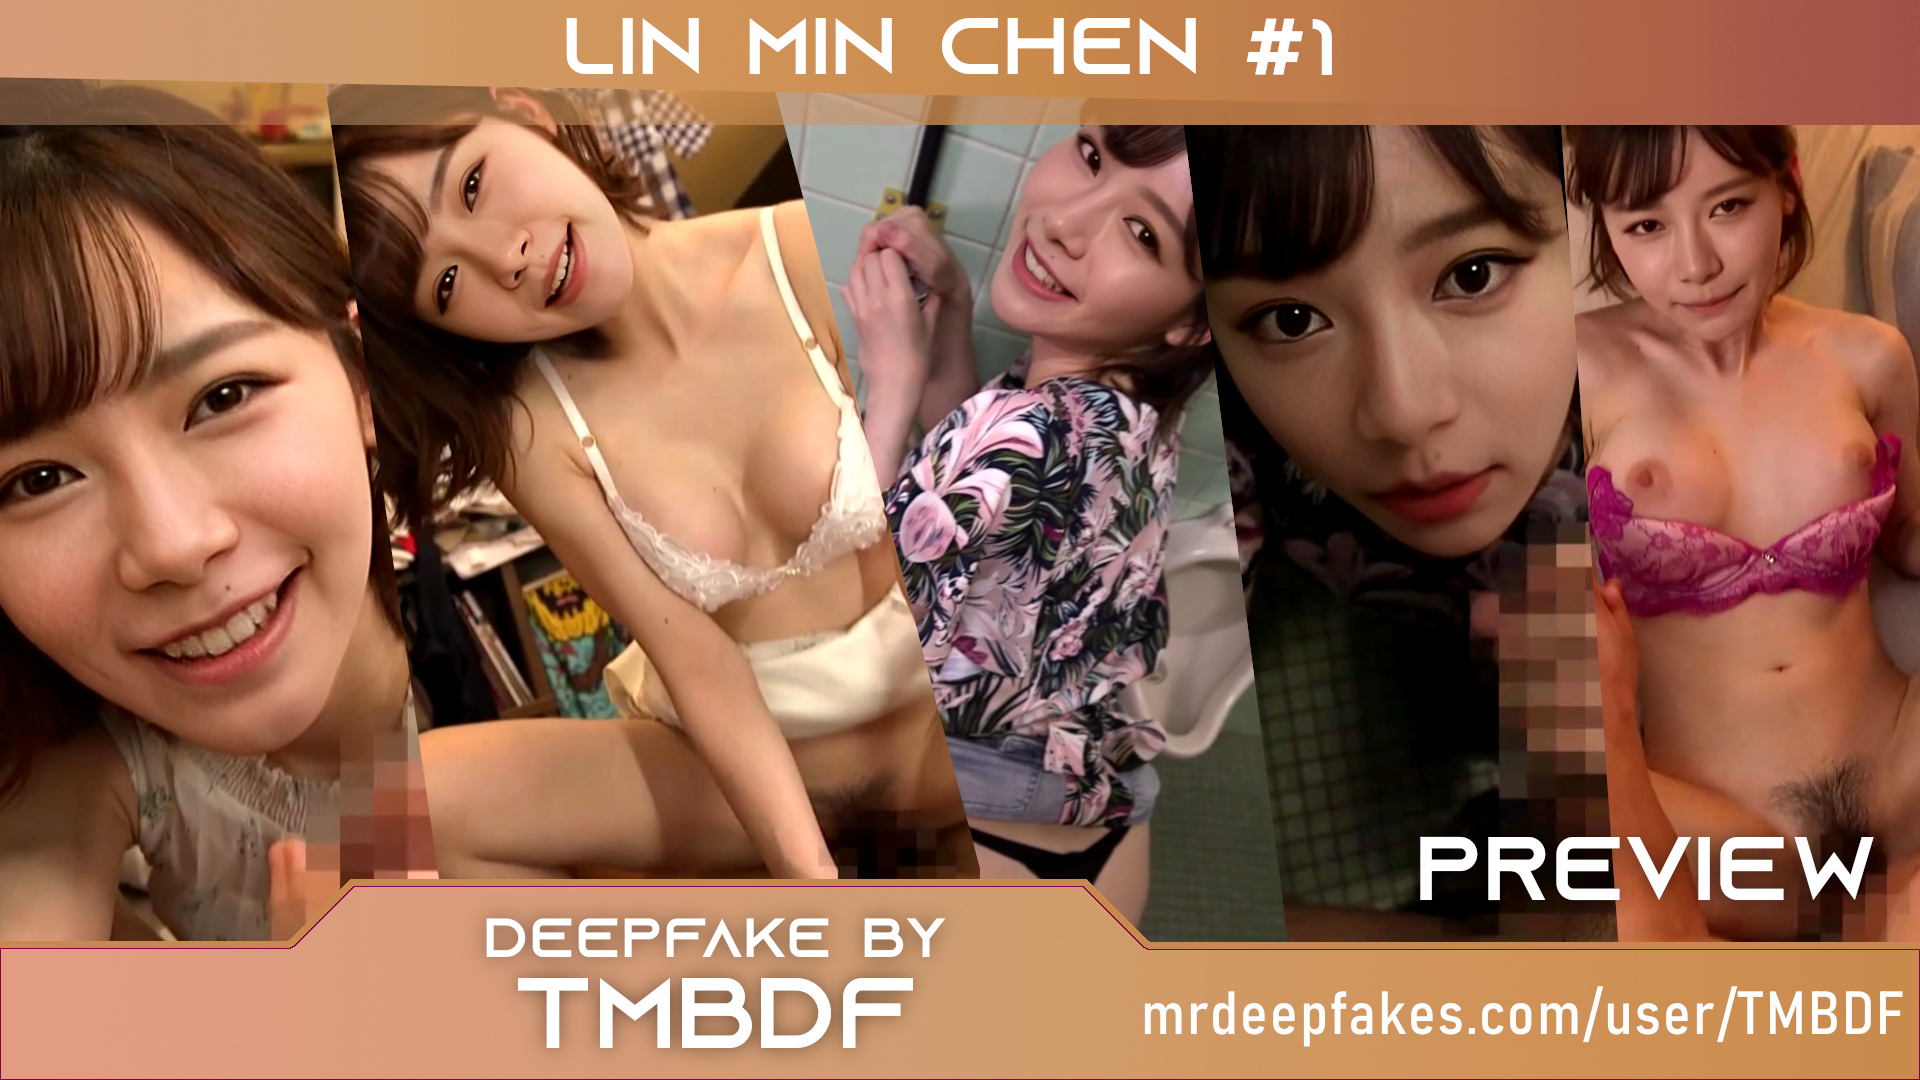 Lin Min Chen #1 - PREVIEW - Full version (47:40) accessible using tokens/crypto